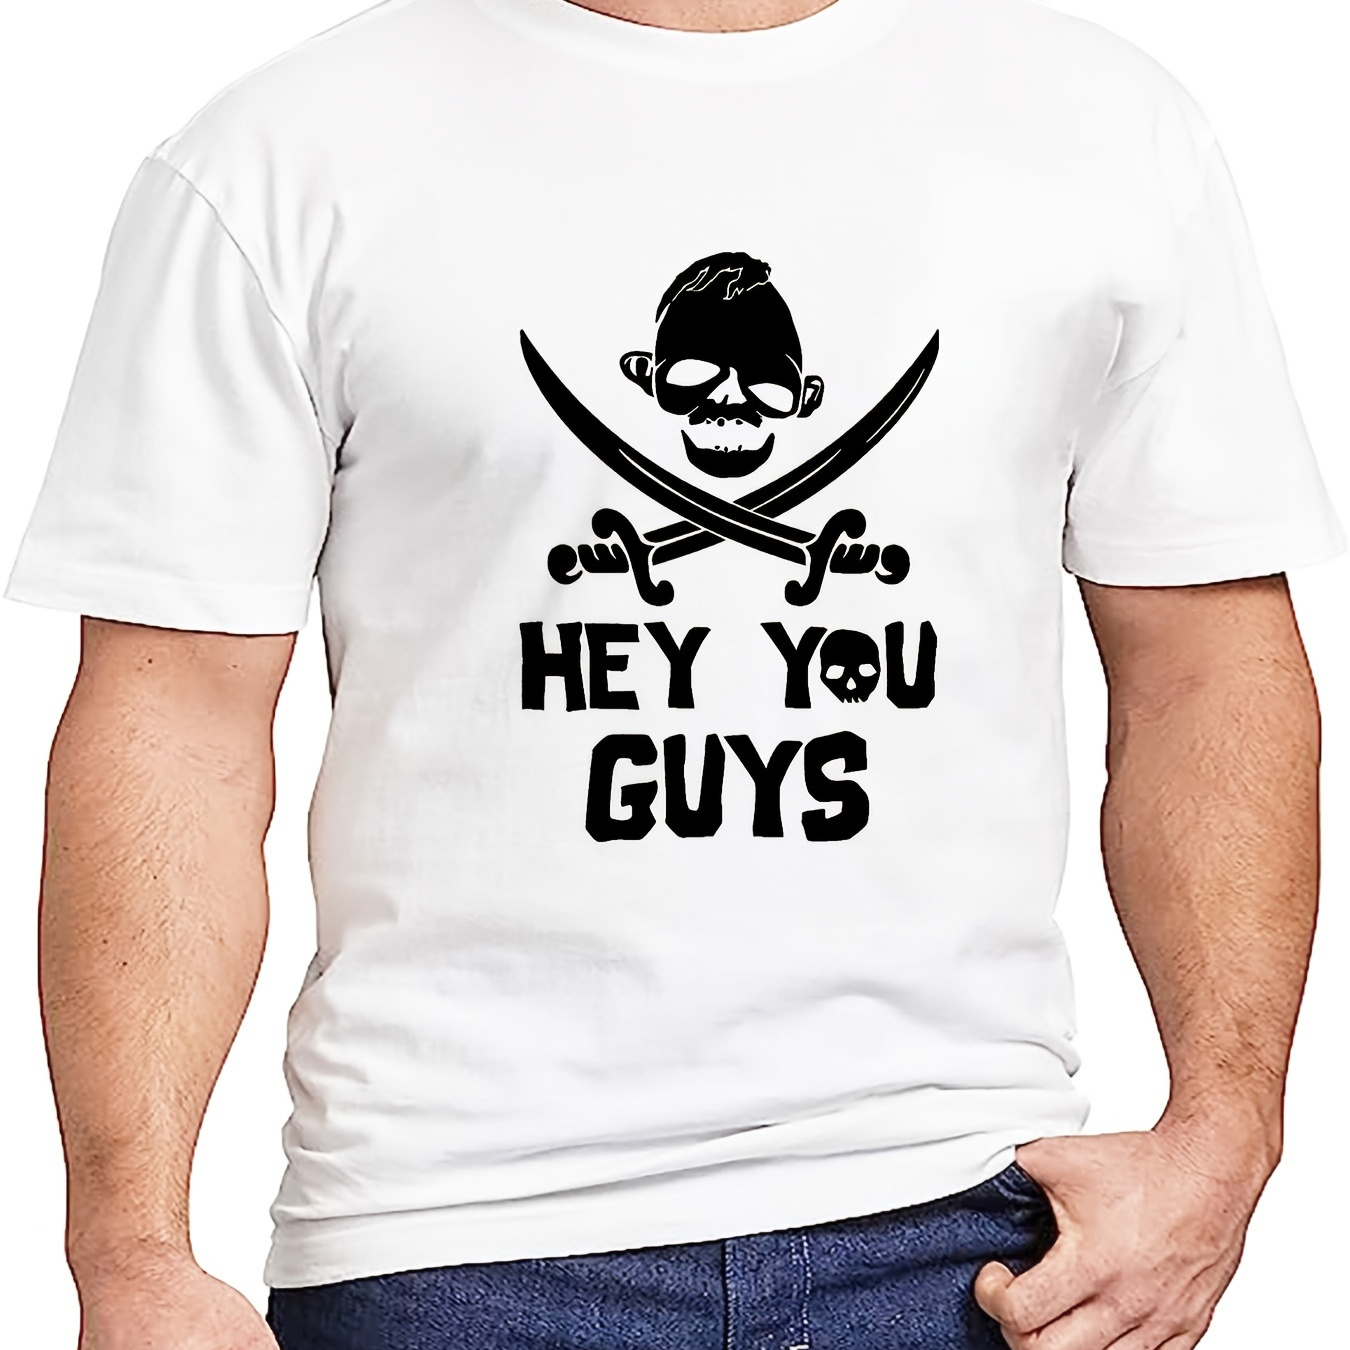 

Pirate Skull & Letter Pattern Print Men's Comfy Chic T-shirt, Graphic Tee Men's Summer Outdoor Clothes, Men's Clothing, Tops For Men, Gift For Men